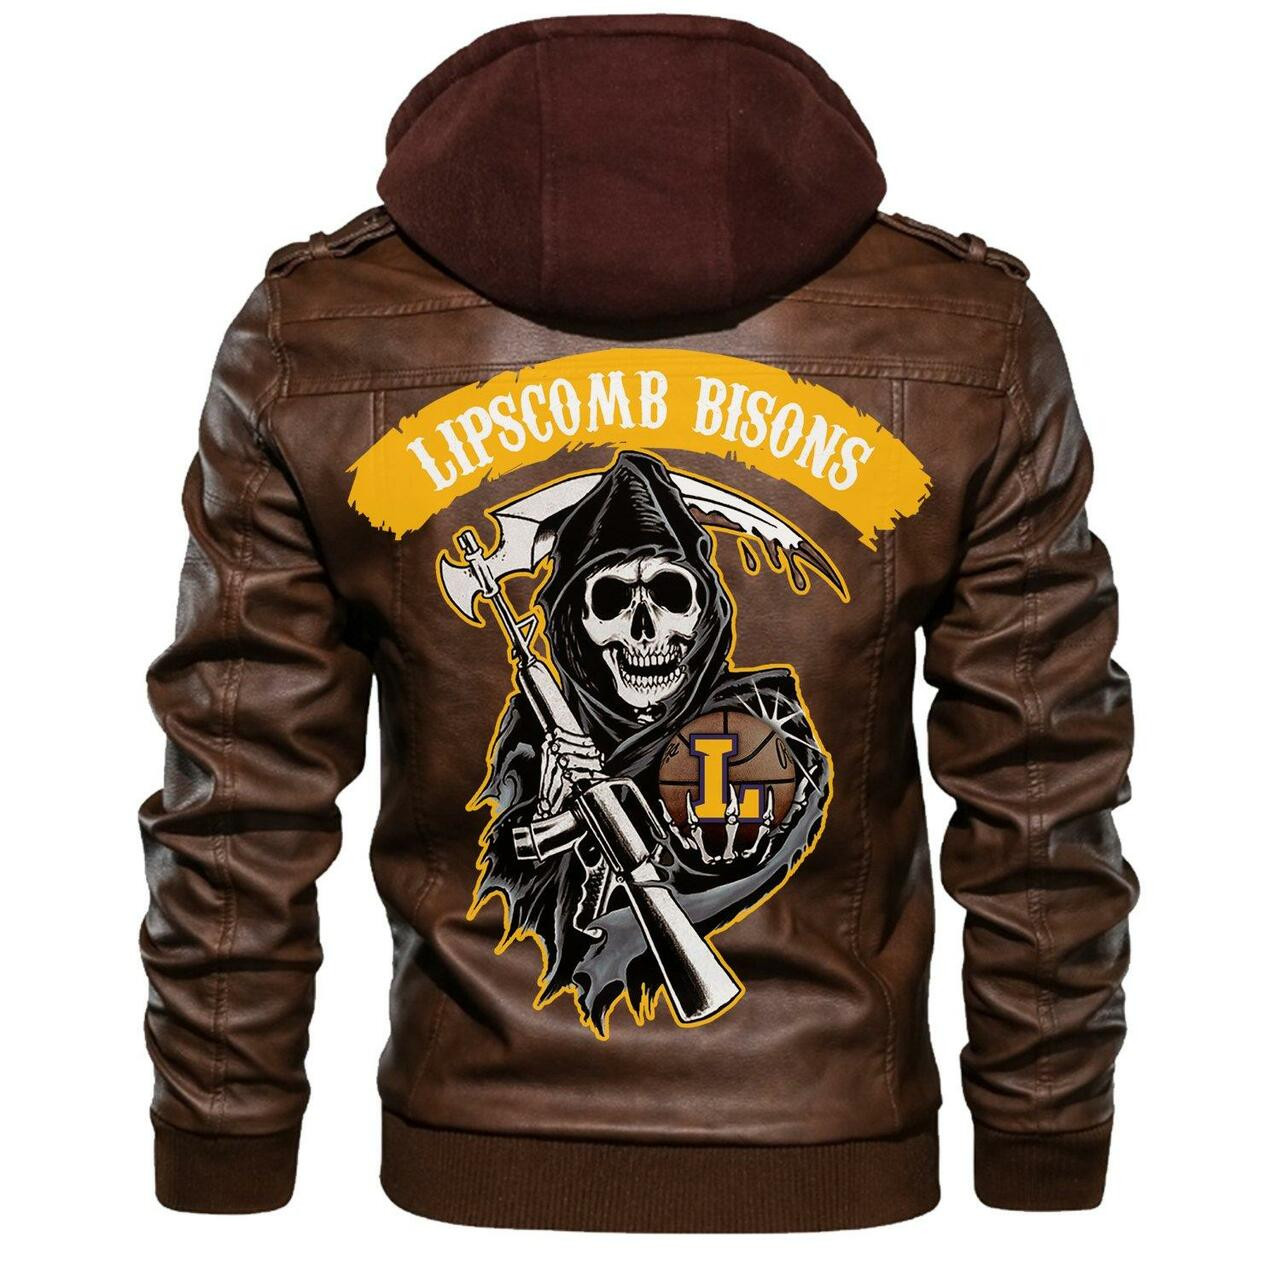 Check out and find the right leather jacket below 122